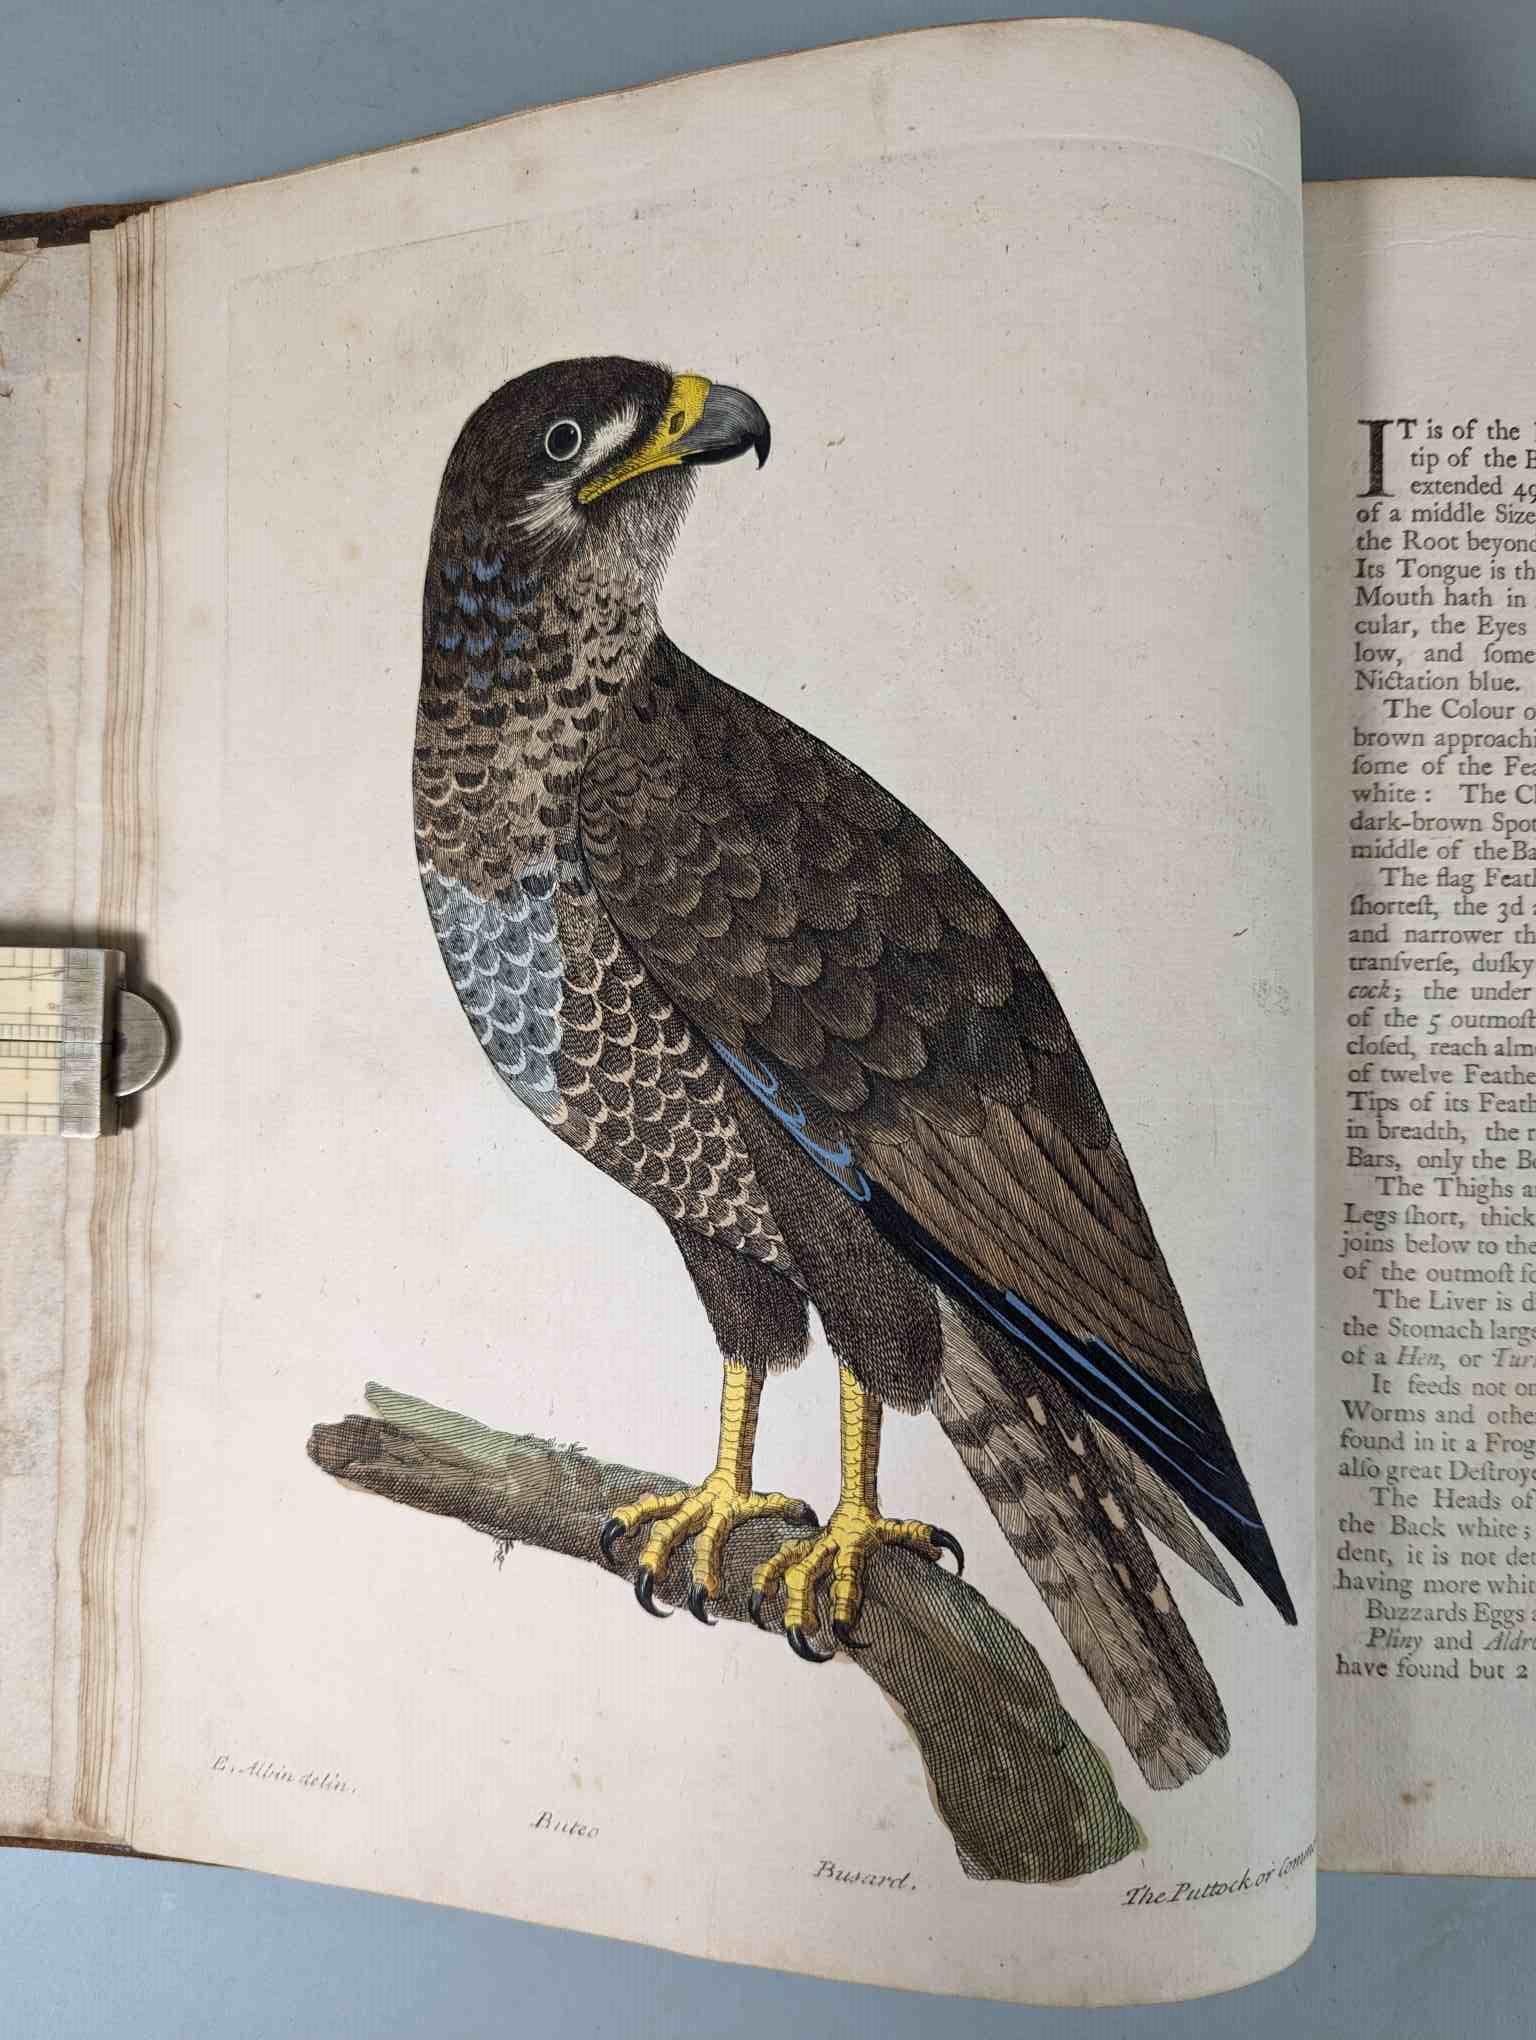 ALBIN, Eleazar. A Natural History of Birds, to which are added, Notes and Observations by W. - Image 8 of 208